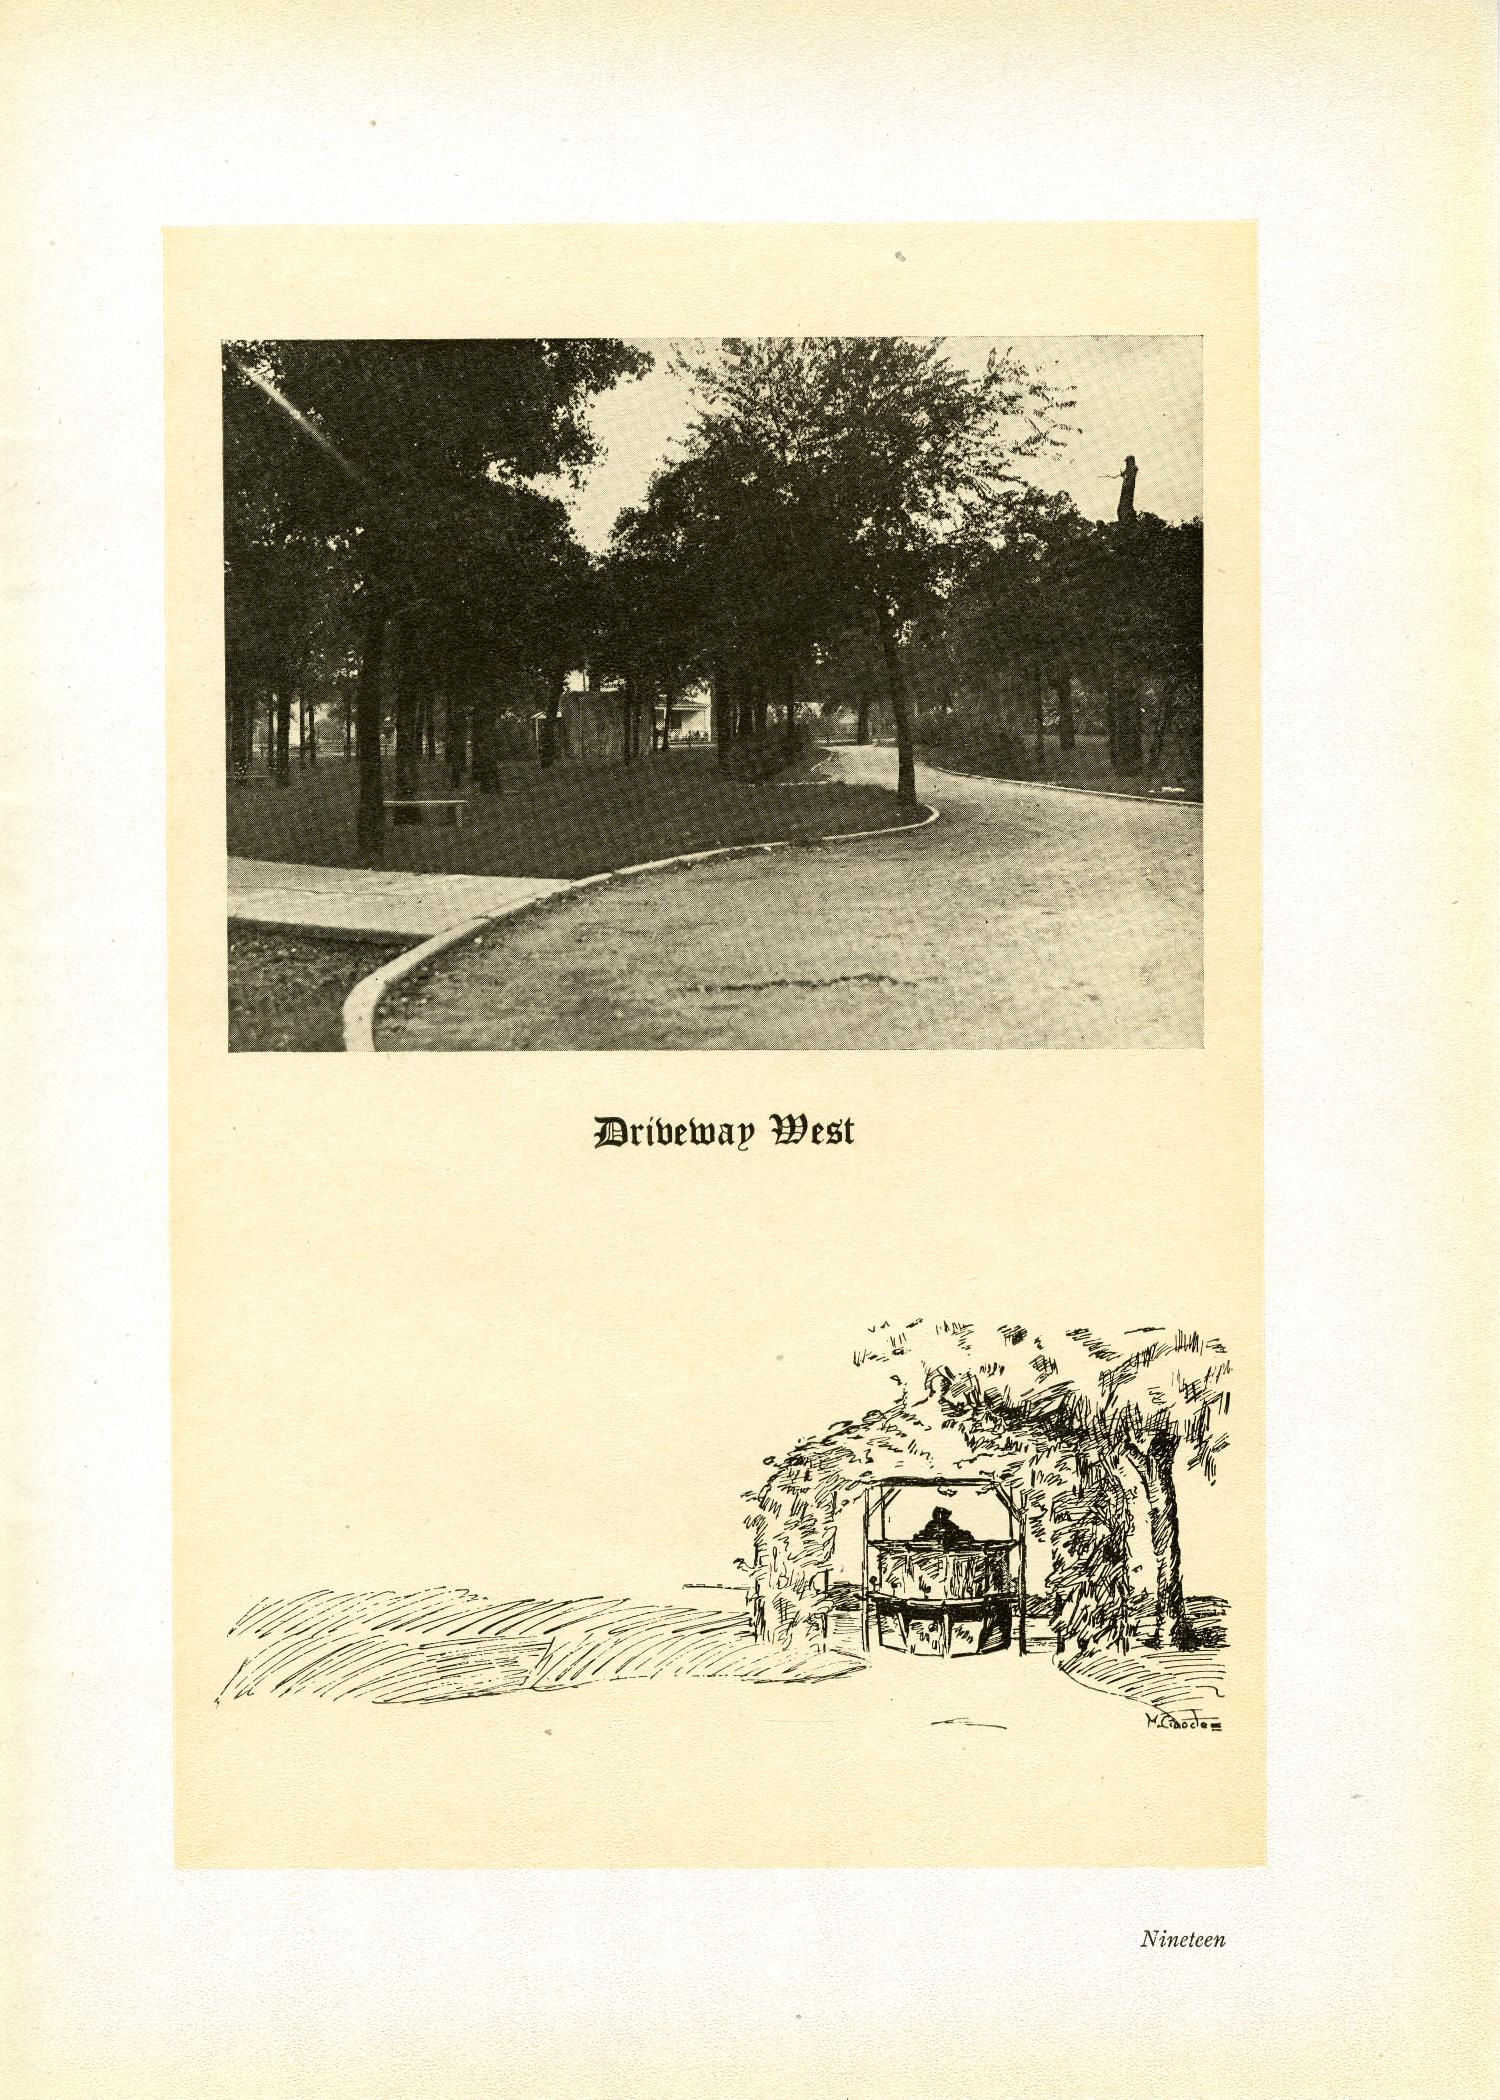 The Yucca, Yearbook of North Texas State Normal School, 1920
                                                
                                                    19
                                                